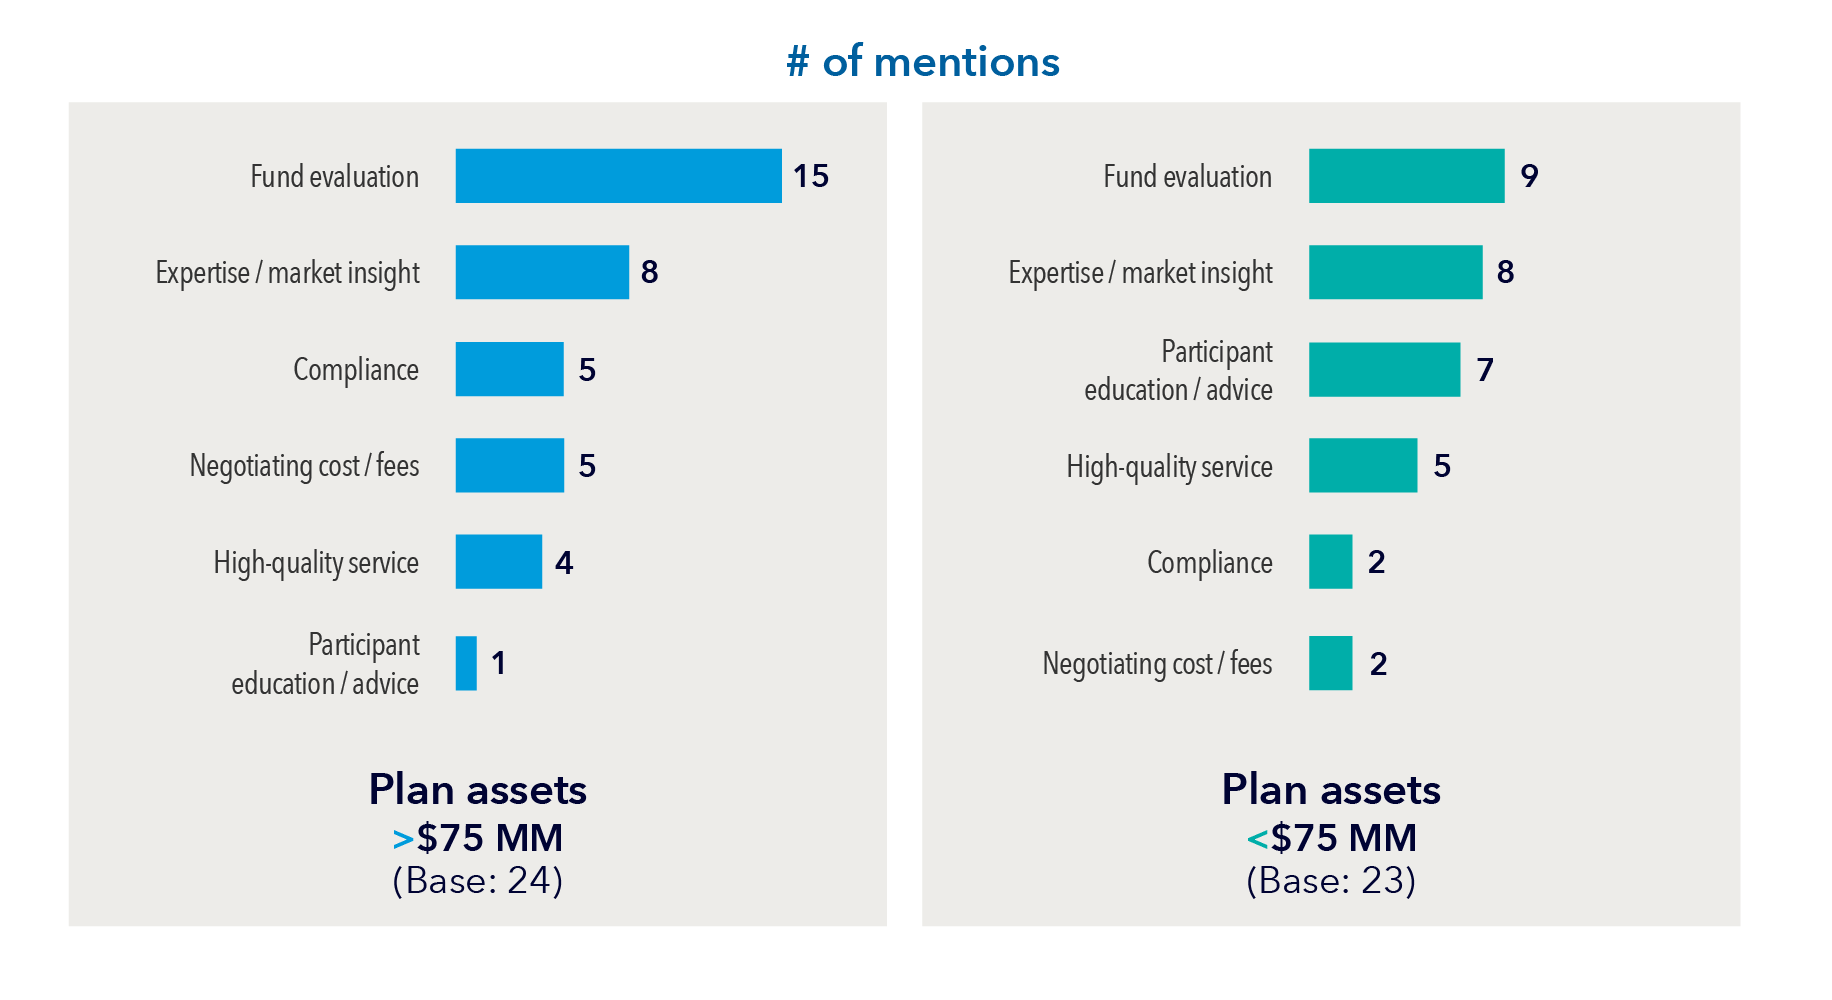 The bar chart above shows plans sponsors’ top value-added services by number of mentions in the survey. The chart on the left represents plans with greater than $75 million in assets. Among a base of 24 respondents, Fund evaluation received 15 mentions, Expertise/marketing insight received 8, Compliance received 5, Negotiating cost/fees received 5, High-quality service received 4, and Participant education/advice received 1. The chart on the right represents plans with less than $75 million in assets. Among a base of 23 respondents, Fund evaluation received 9 mentions, Expertise/market insight received 8, Participant education/advice received 7, High-quality service received 5, Compliance received 2, and Negotiating cost/fees received 2.